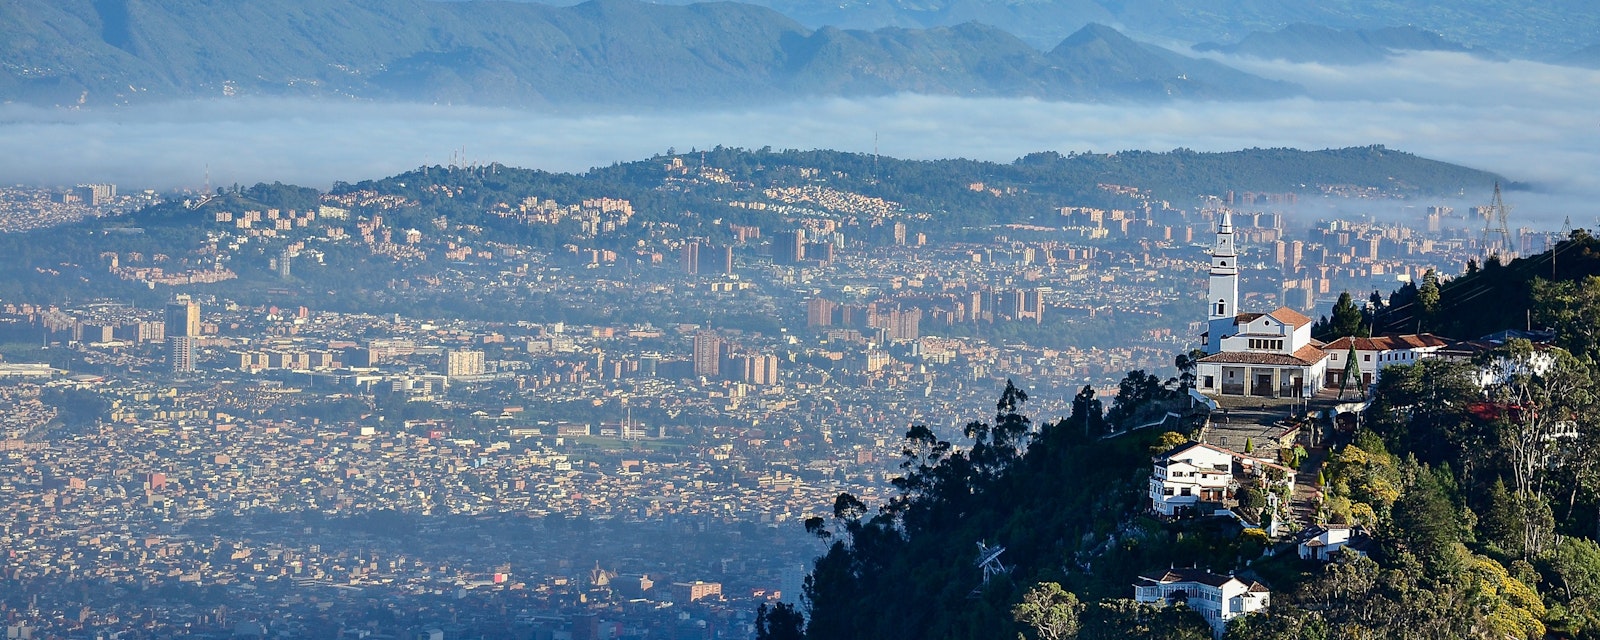 Aerial,View,Of,The,City,Of,Bogota